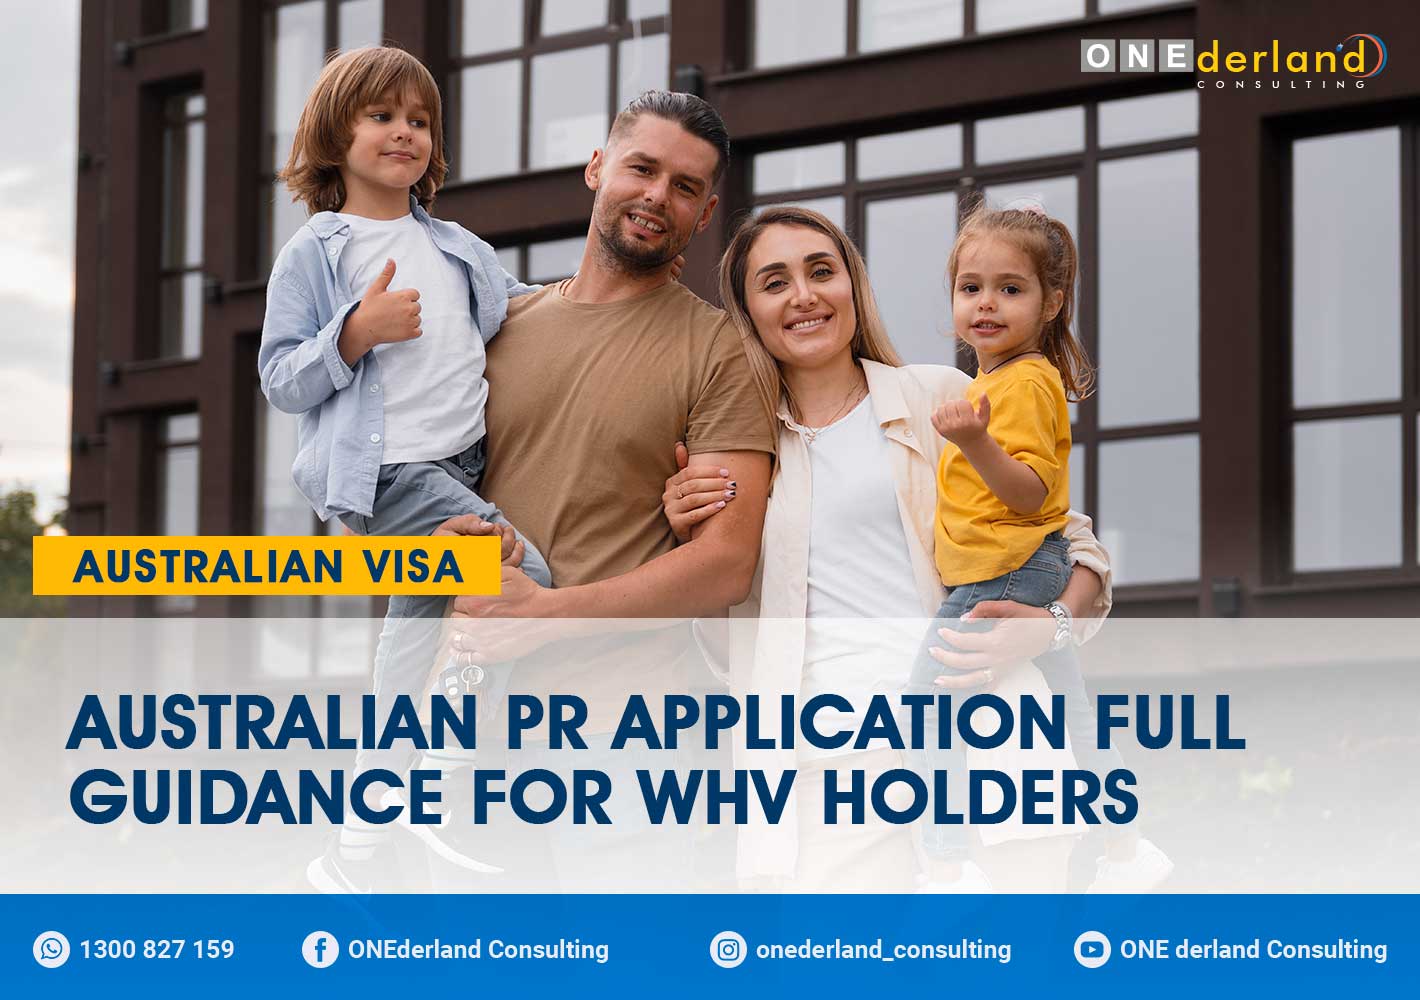 From Working Holiday Visa to PR in Australia: Full Guidelines